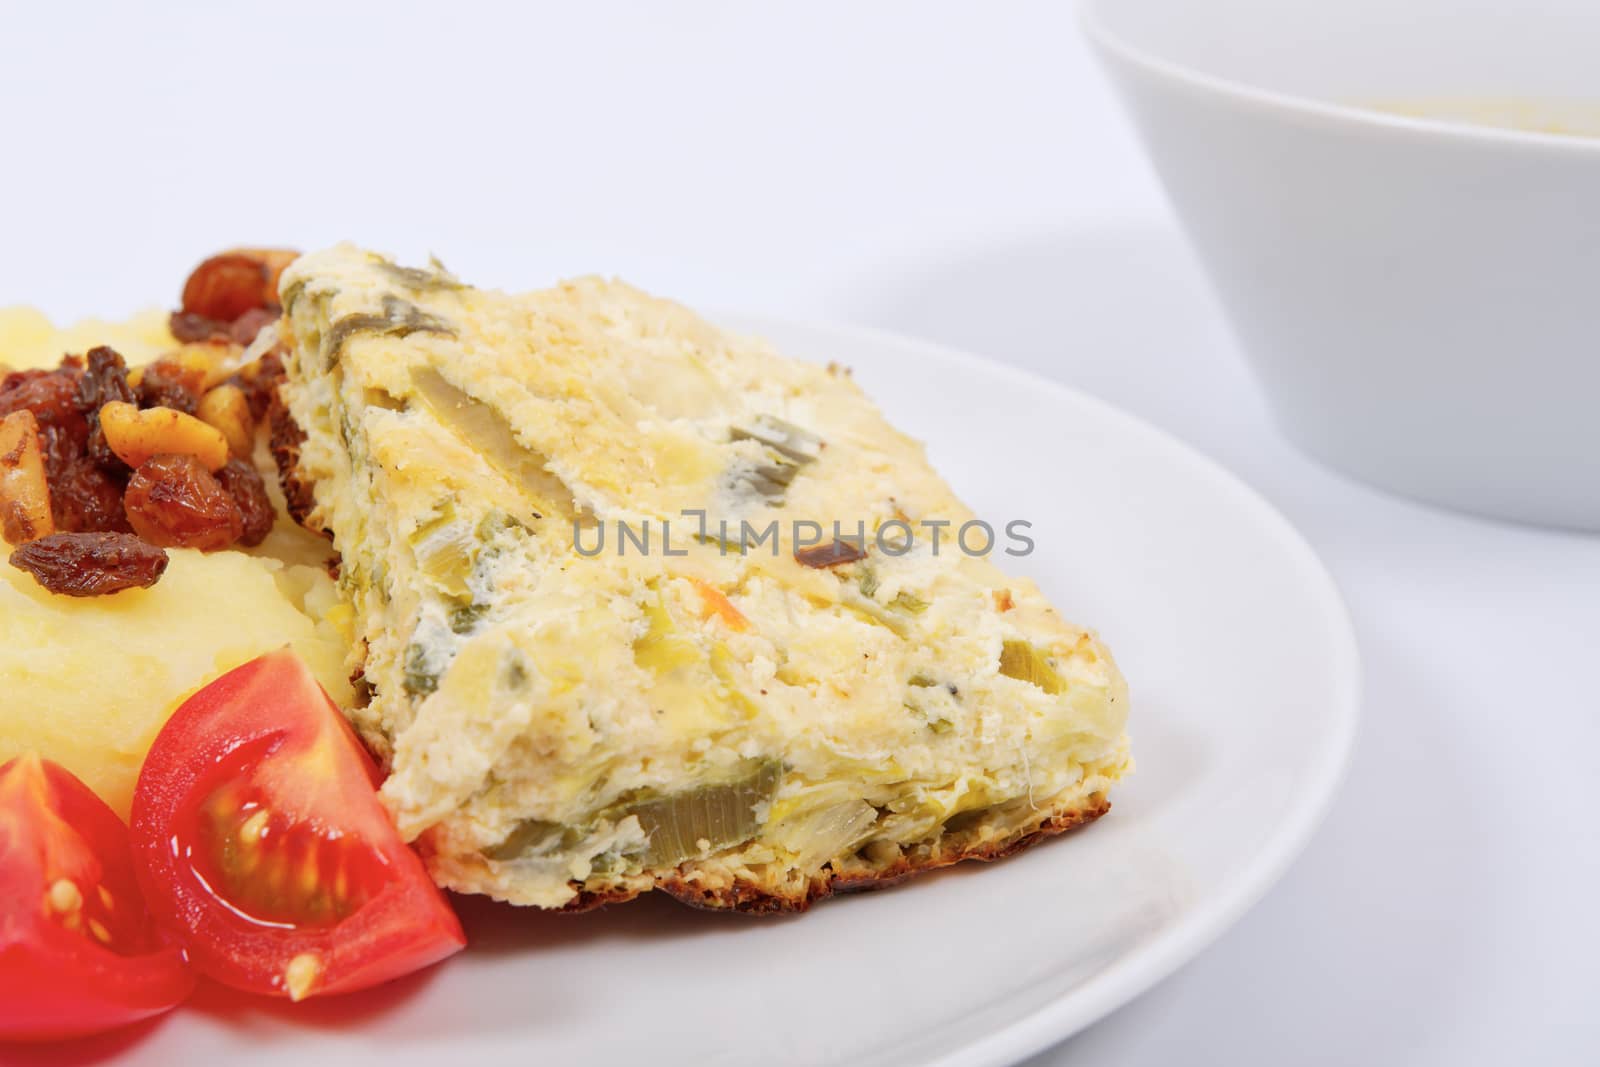 Baked leek with mashed potatoes on a white background